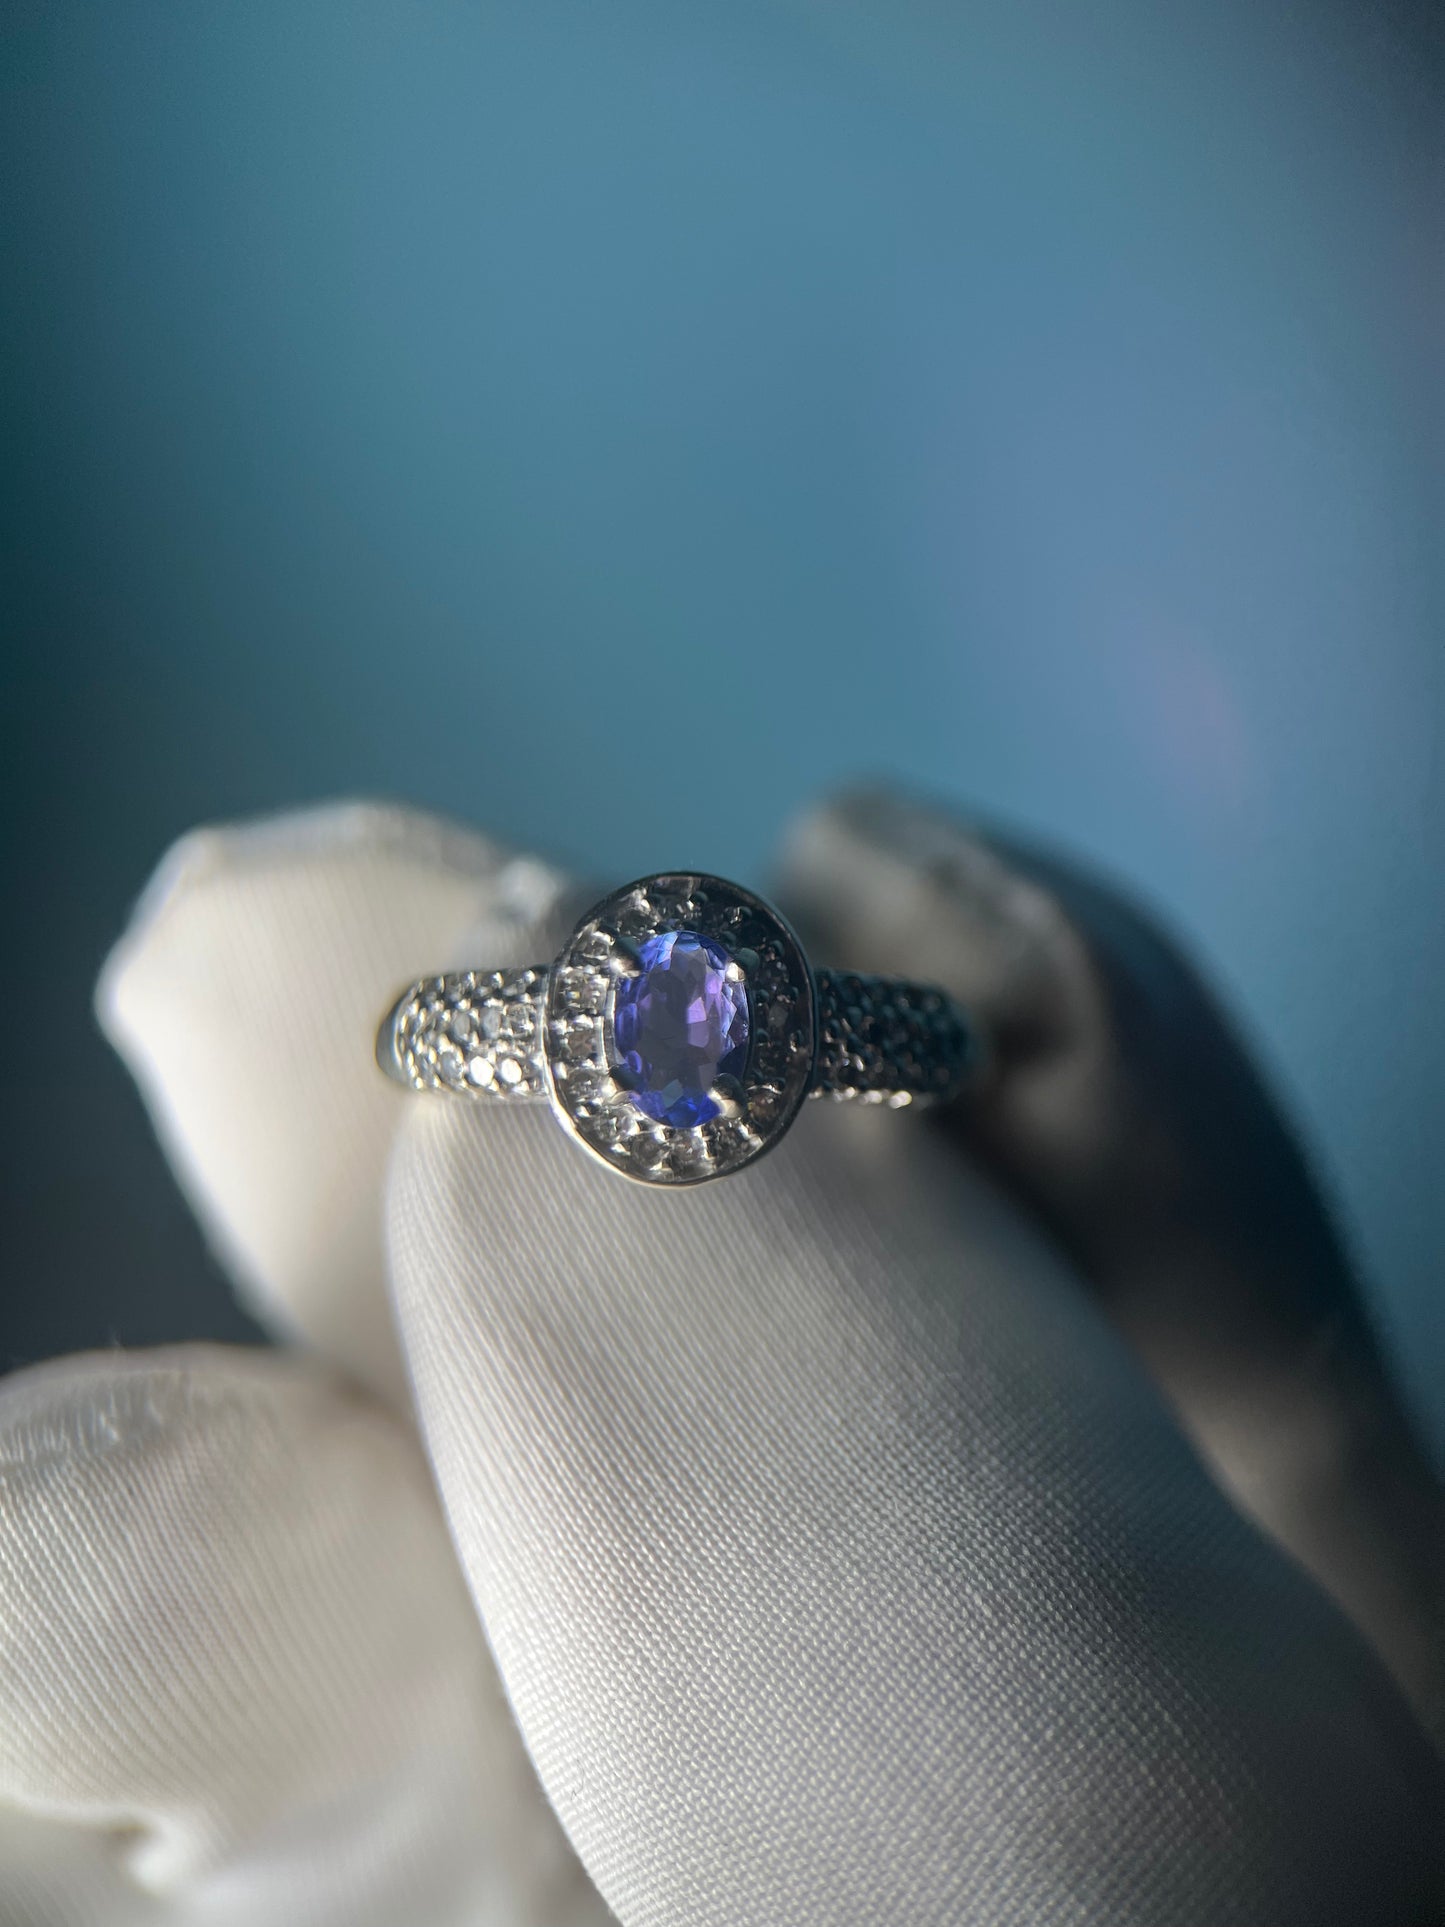 Iolite and Diamond Ring in 10k White Gold